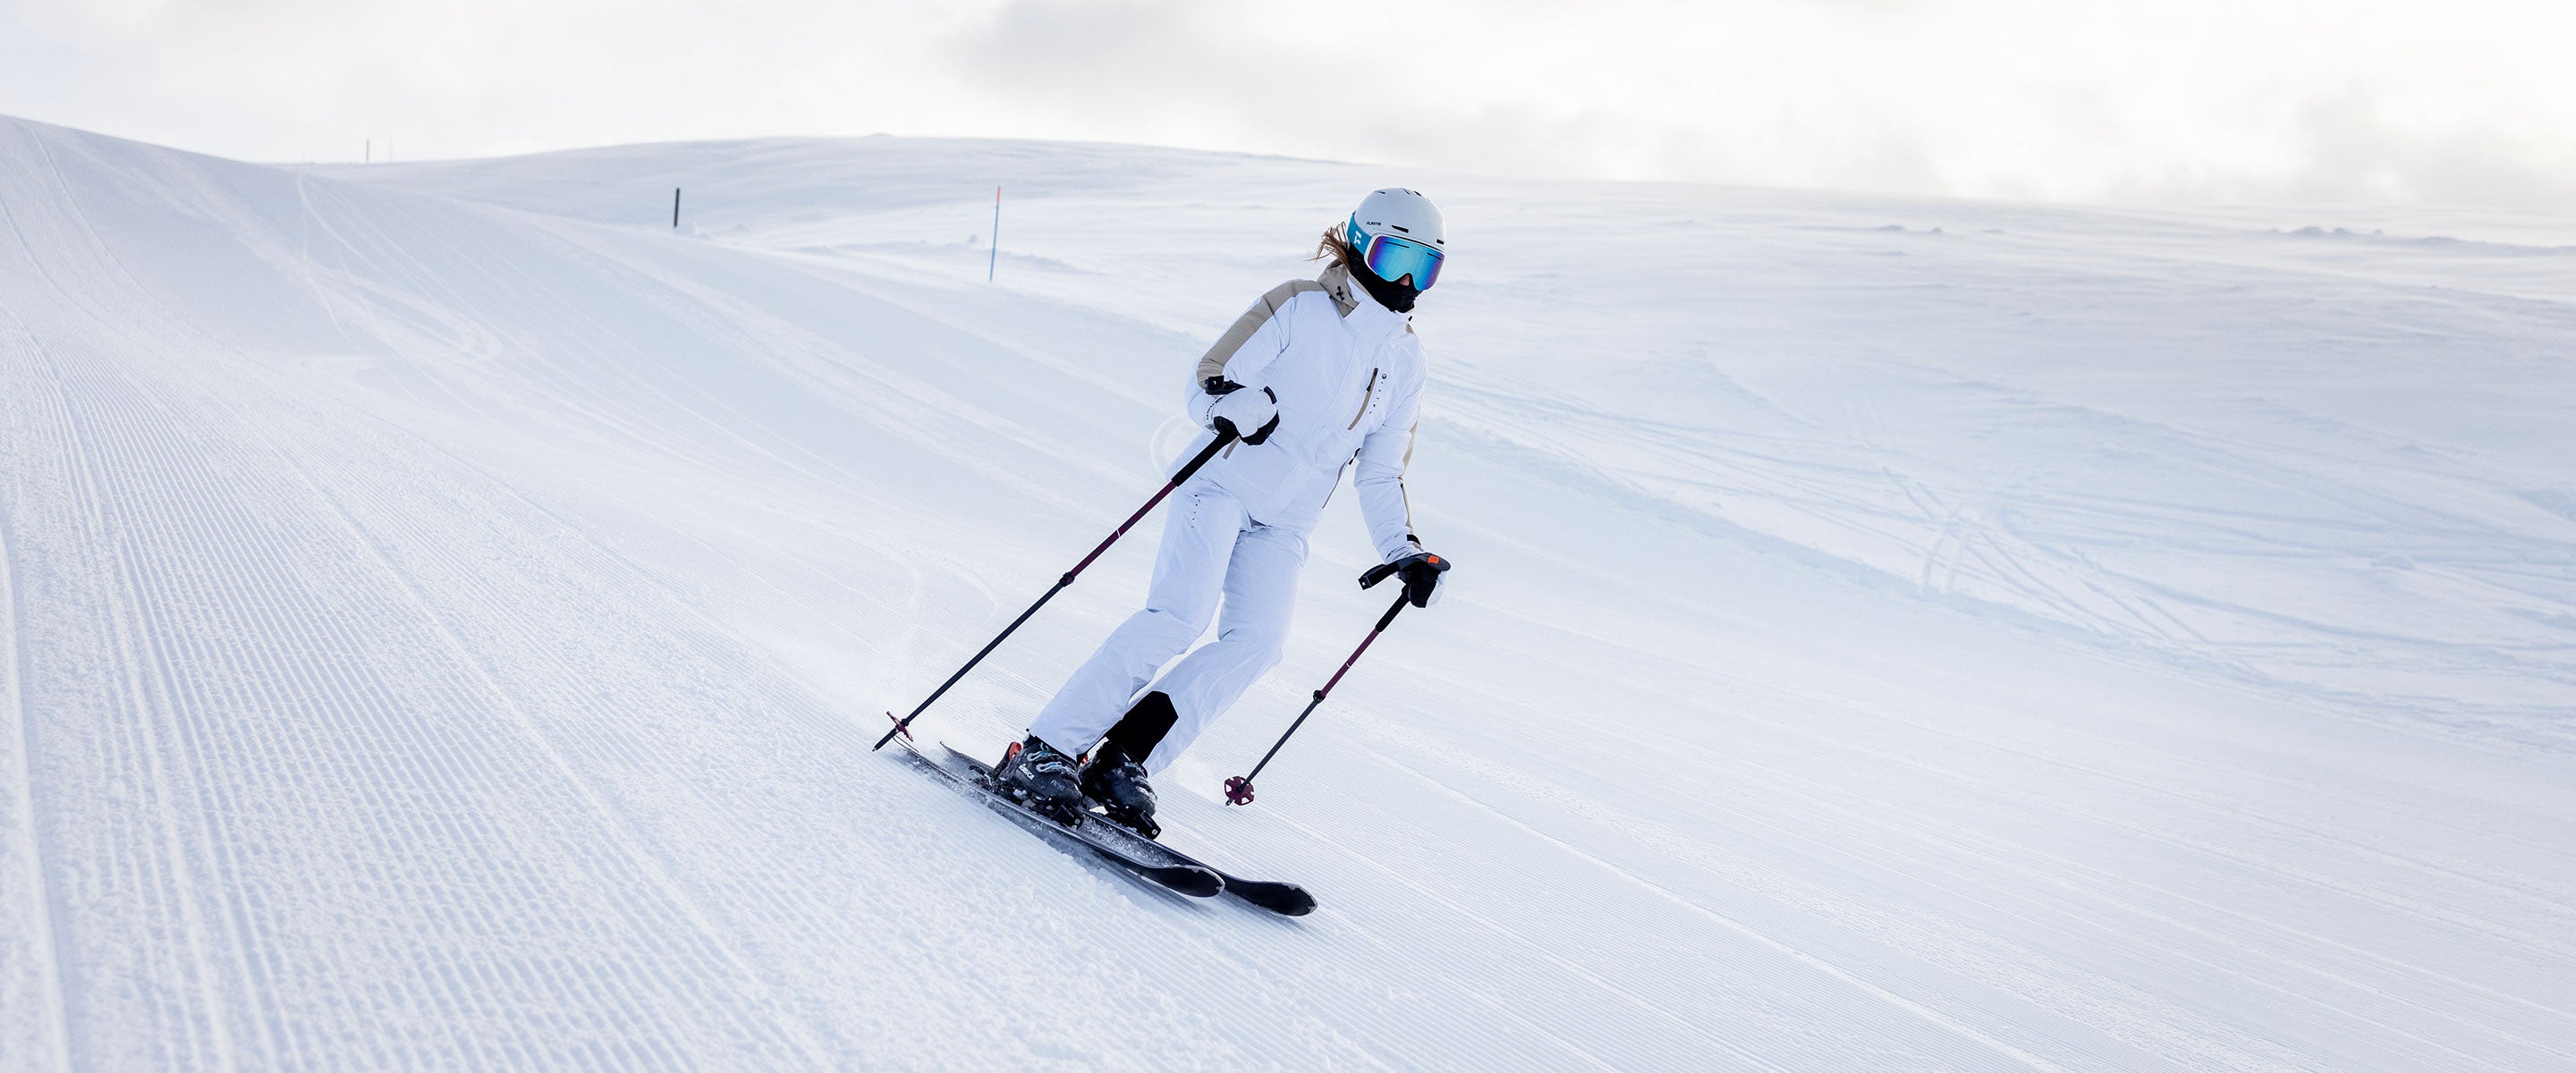 Win two ski outfits from Halti worth £1,480